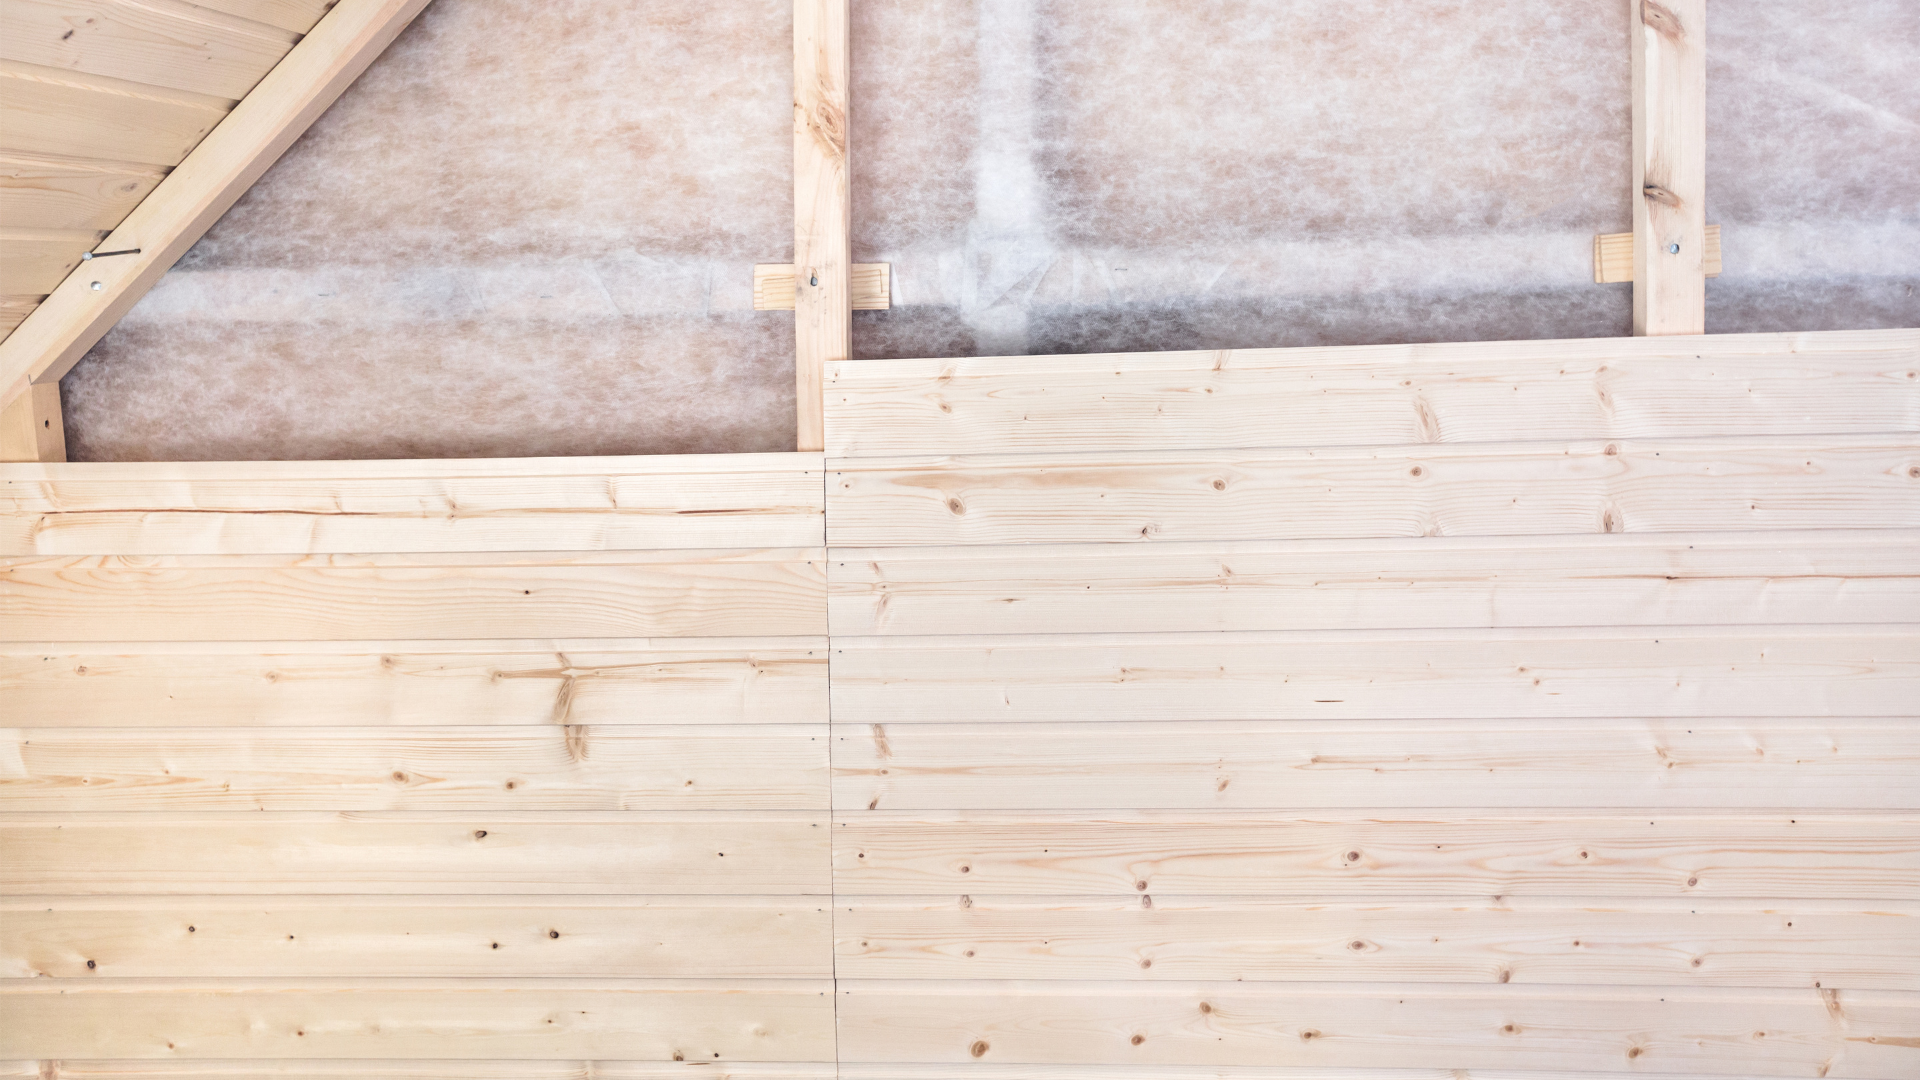 Cladding on interior of shed being installed on a timber frame